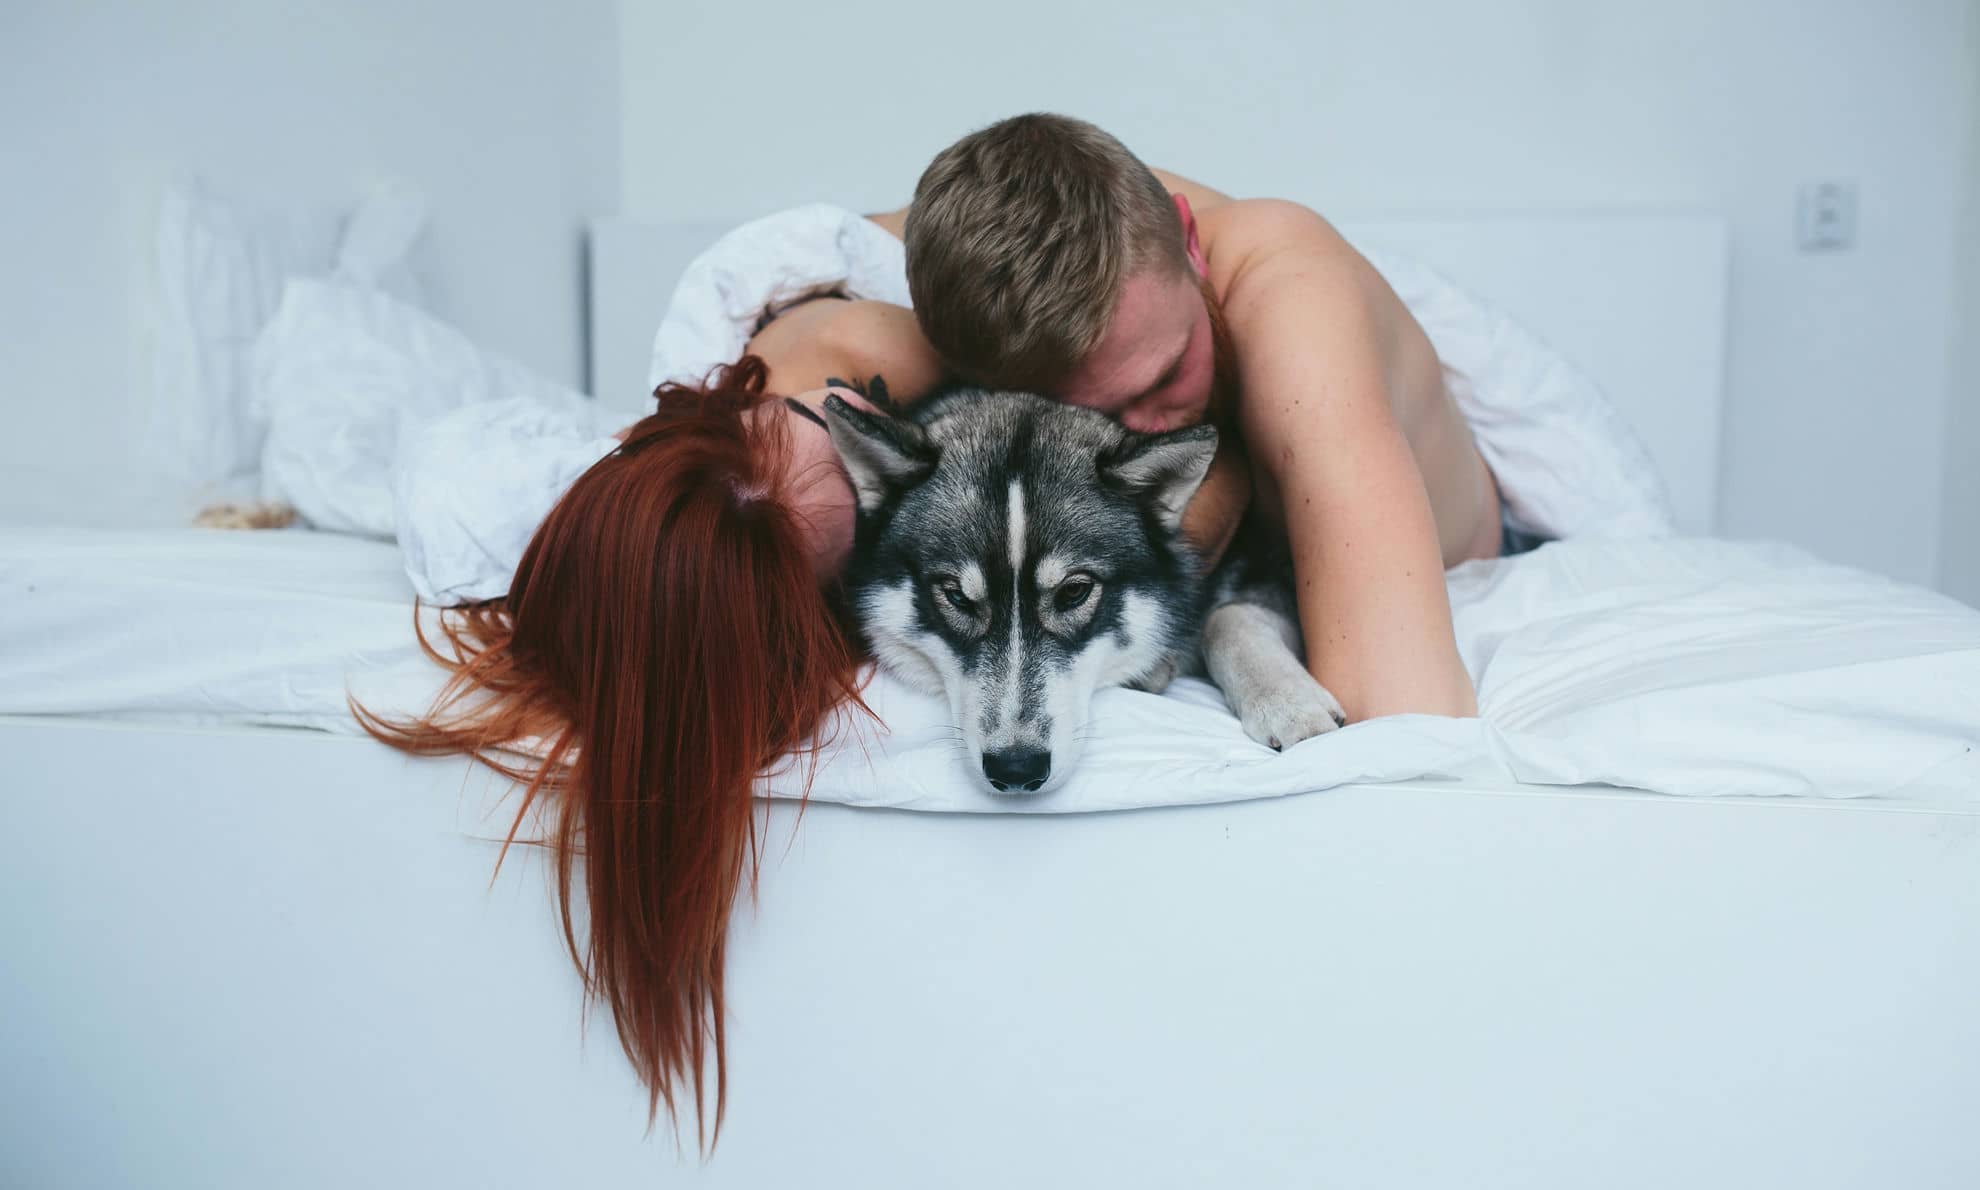 Couple has threesome with dog